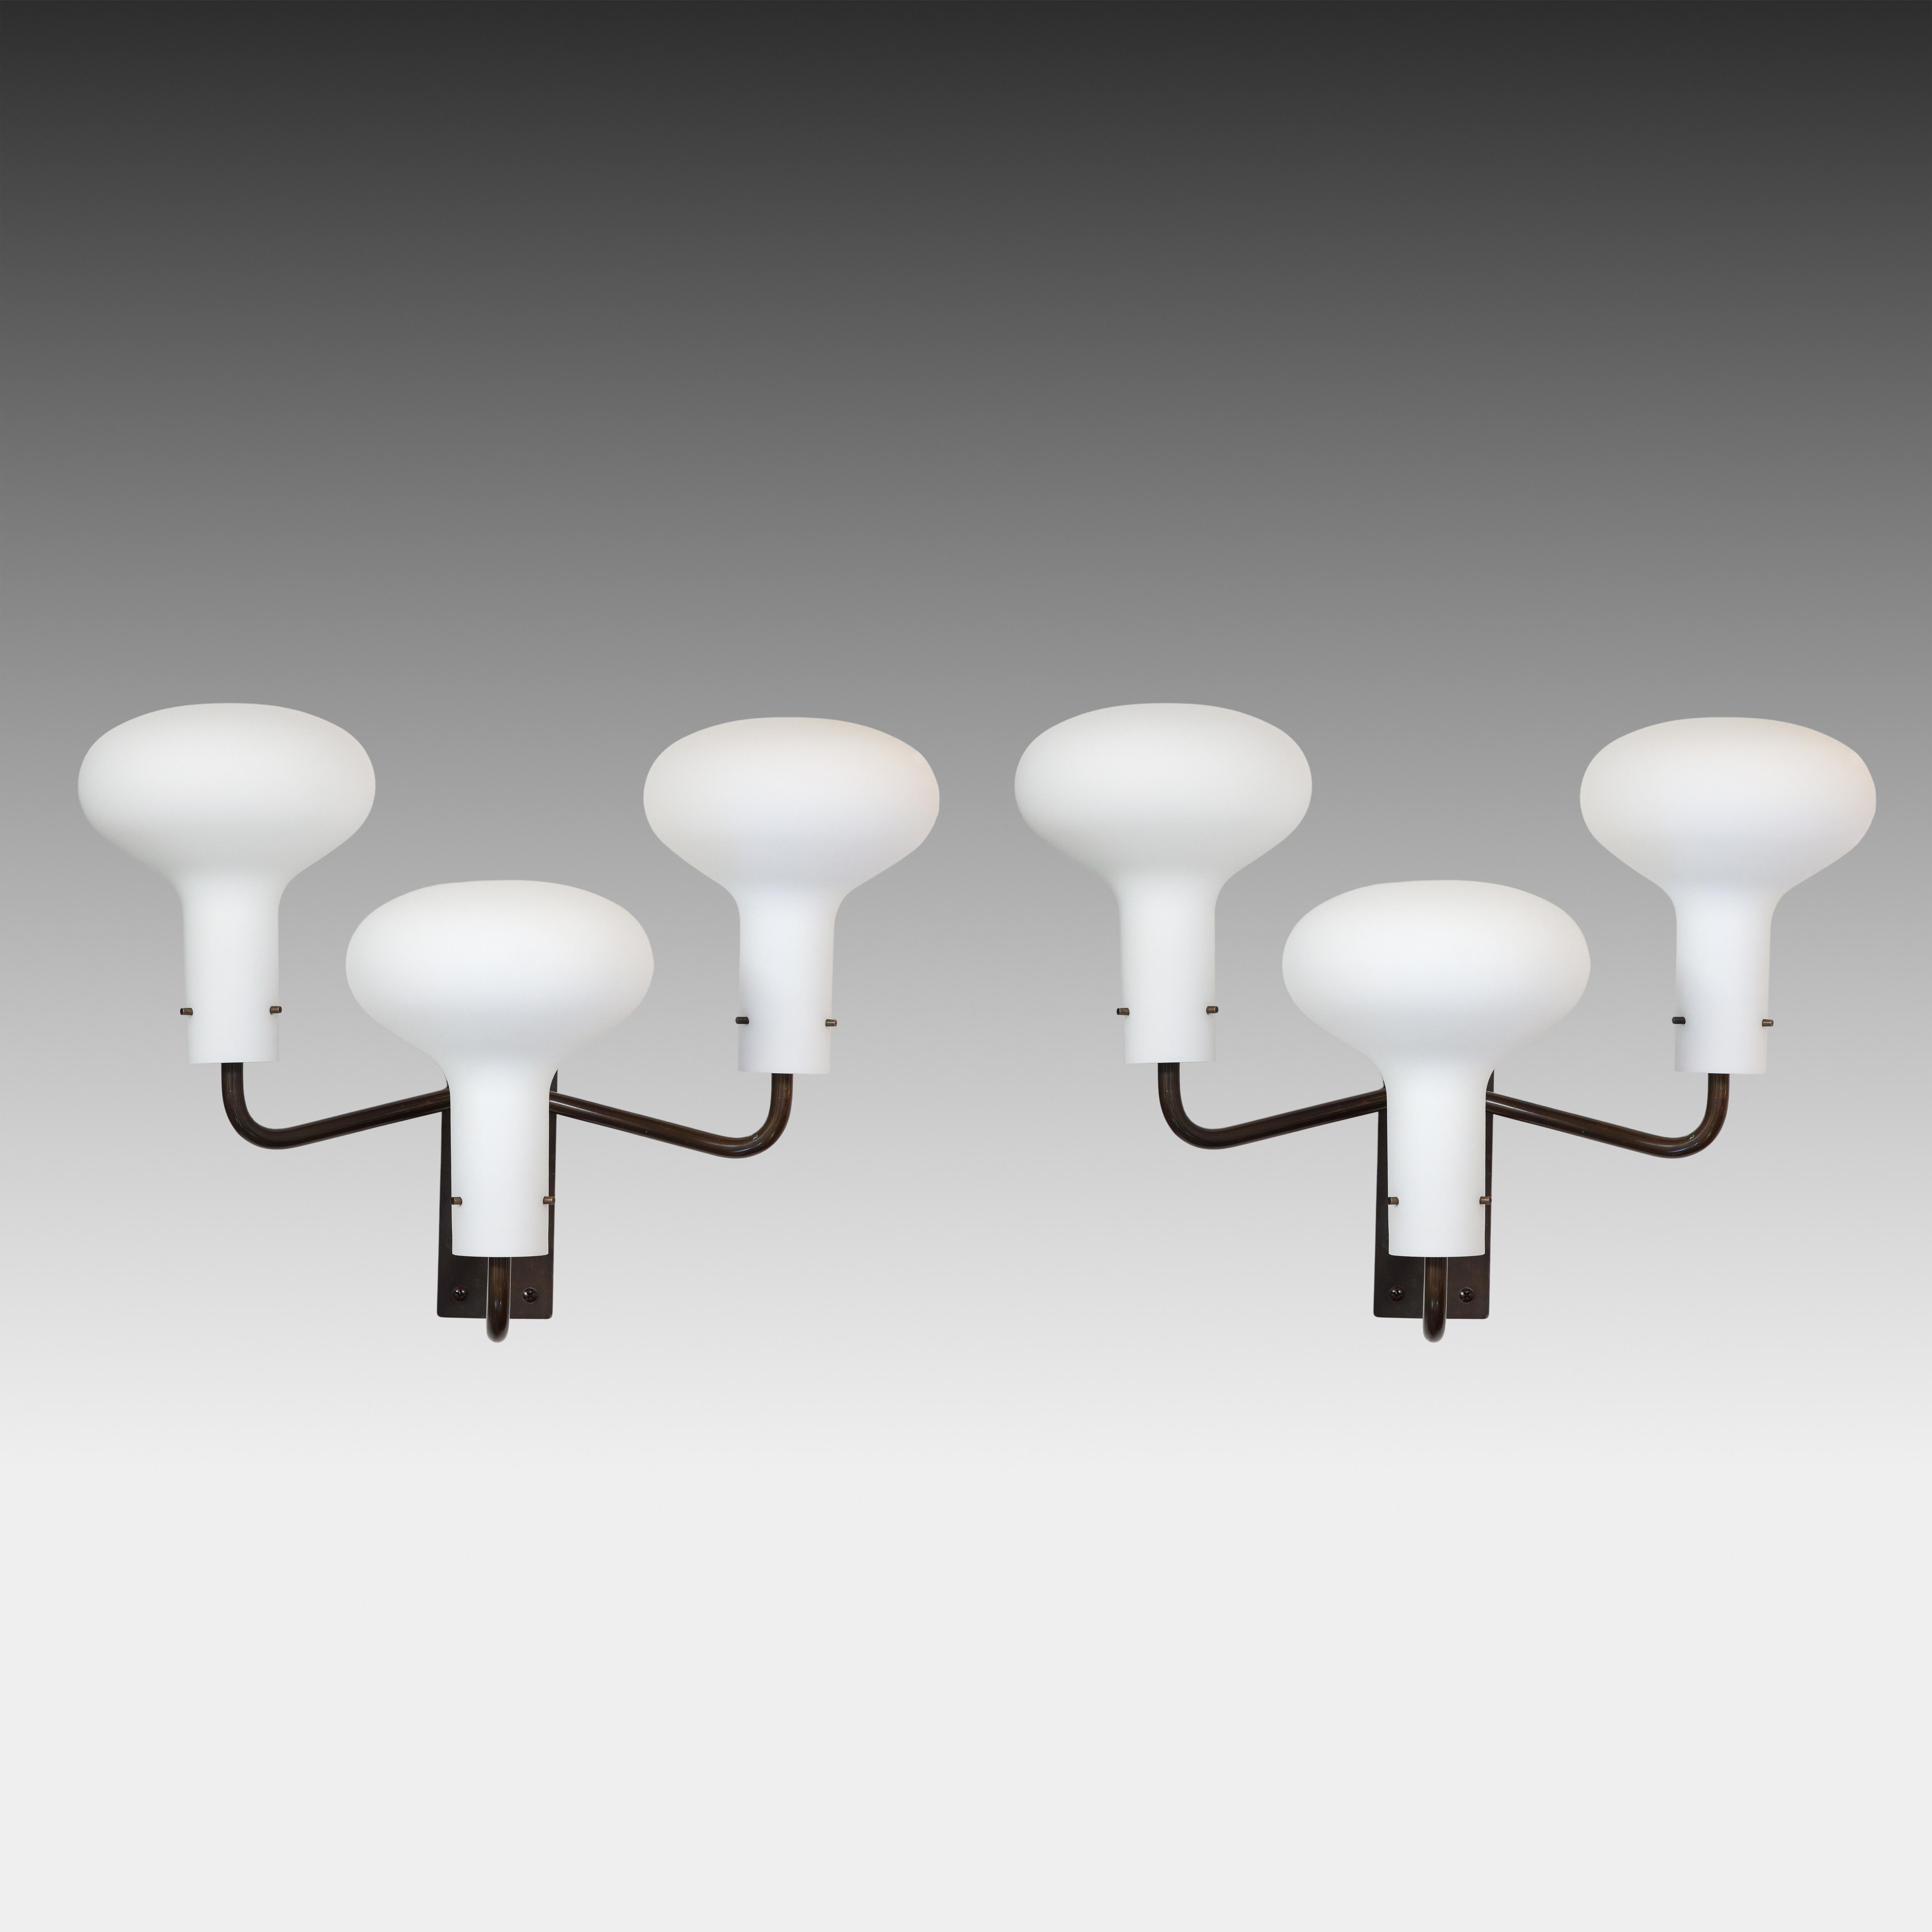 Ignazio Gardella for Azucena Pair of Wall Lights Model LP12, Italy, 1950s In Good Condition For Sale In New York, NY